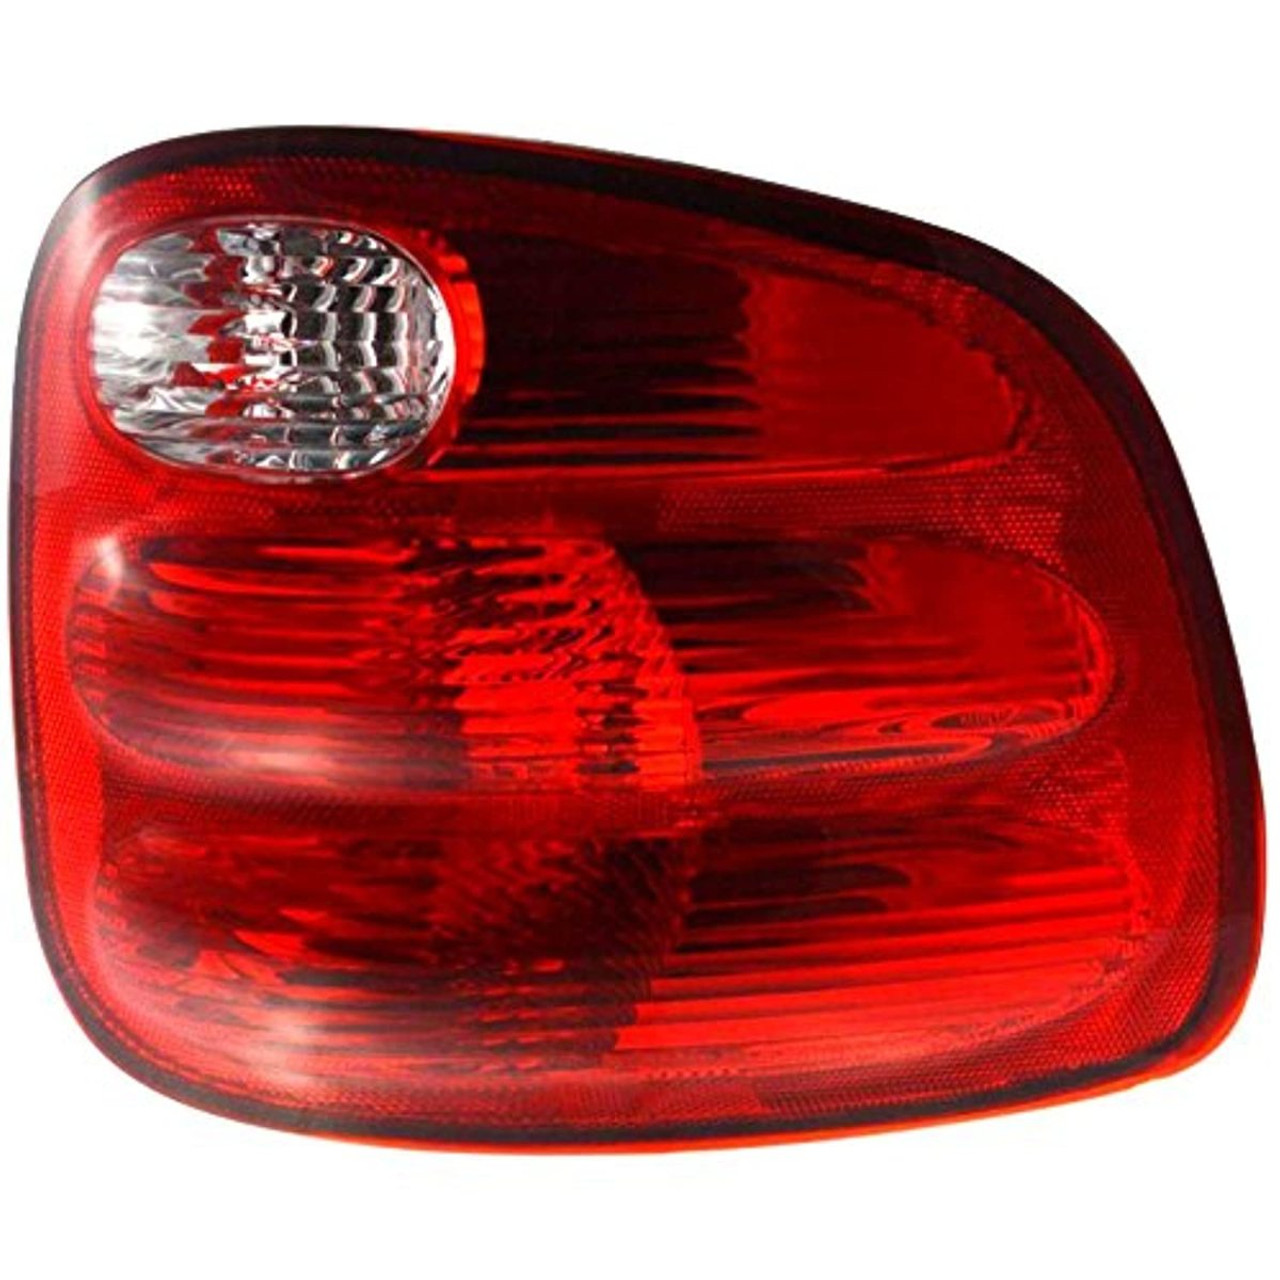 Fits 00-03 Ford F150 Flareside / 04 Ford F150 Heritage Flareside / 01-04 Ford F150 Crew Cab Right Passenger Tail Lamp Unit Assembly with Red Lens